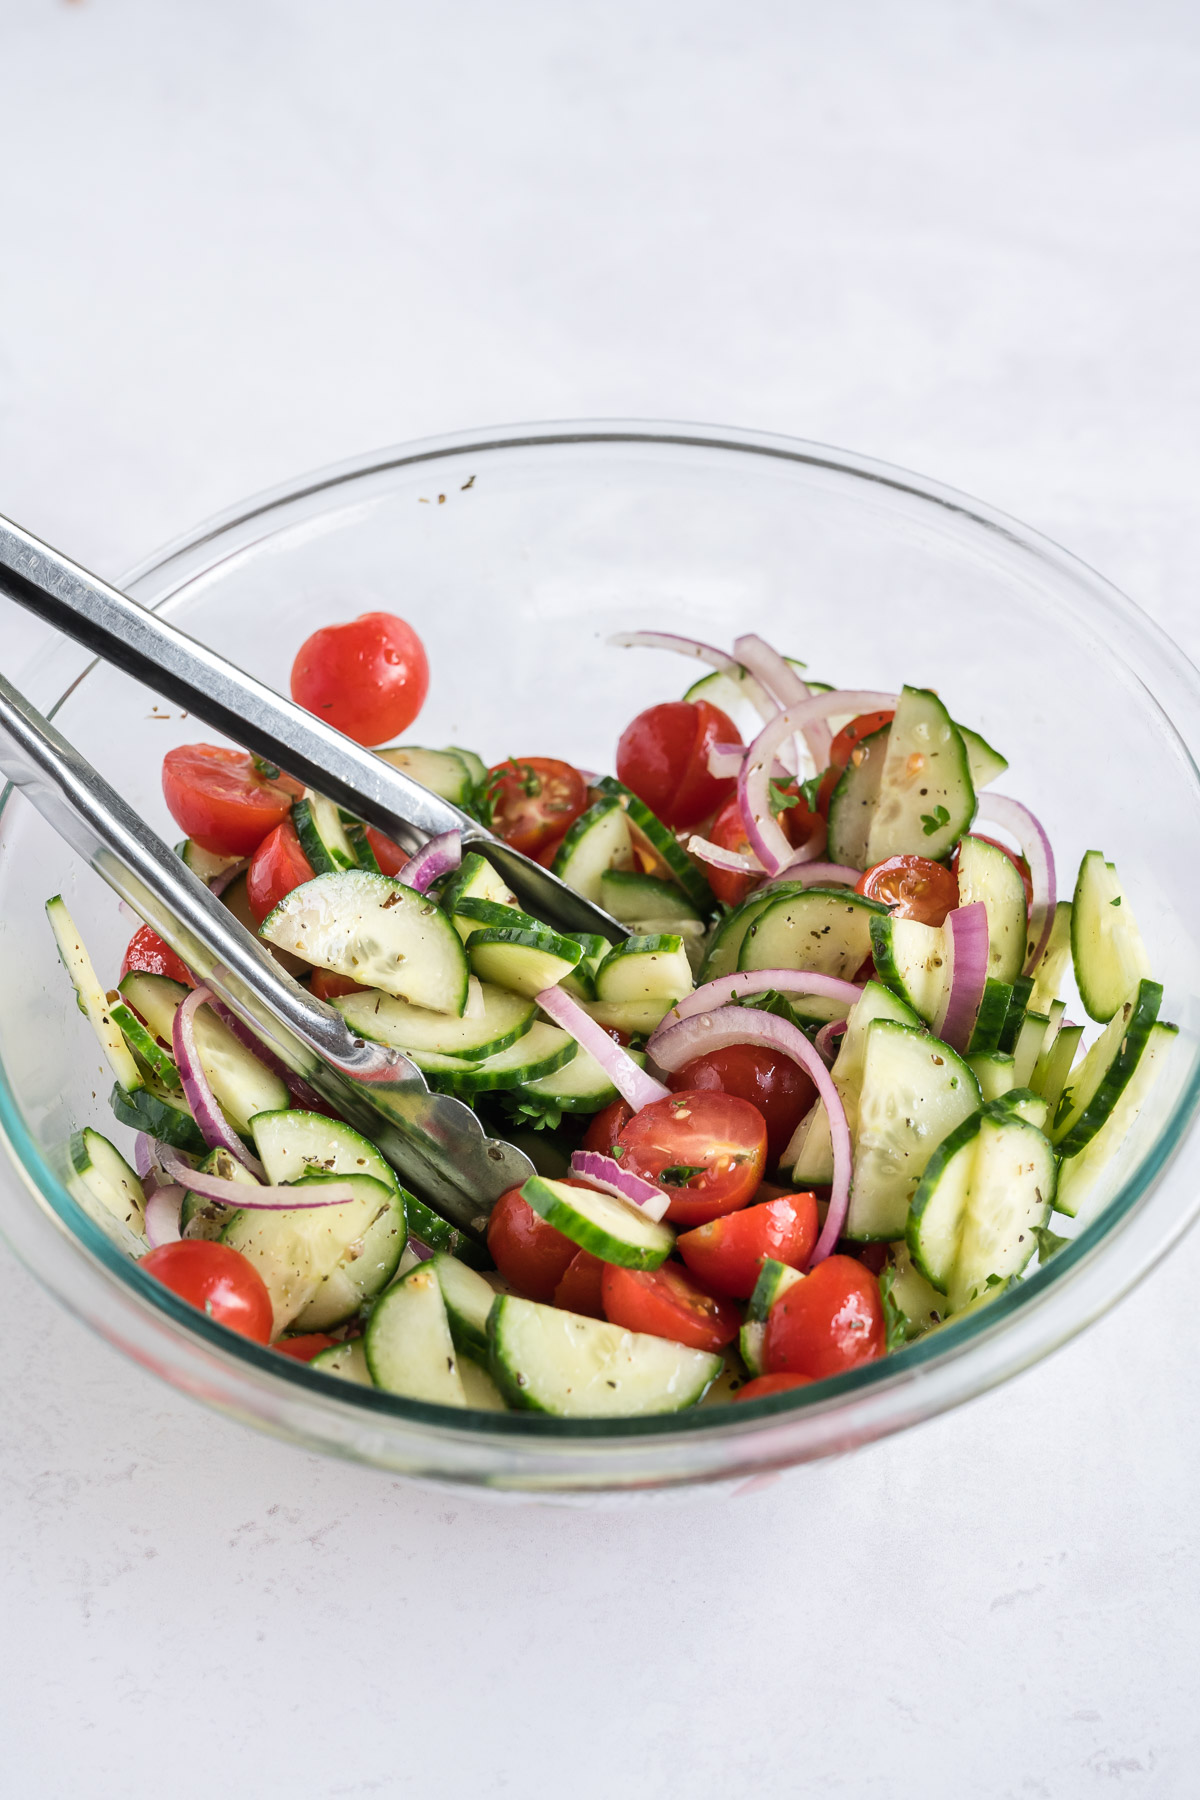 Healthy veggies are tossed with Greek dressing for this quick and easy salad.